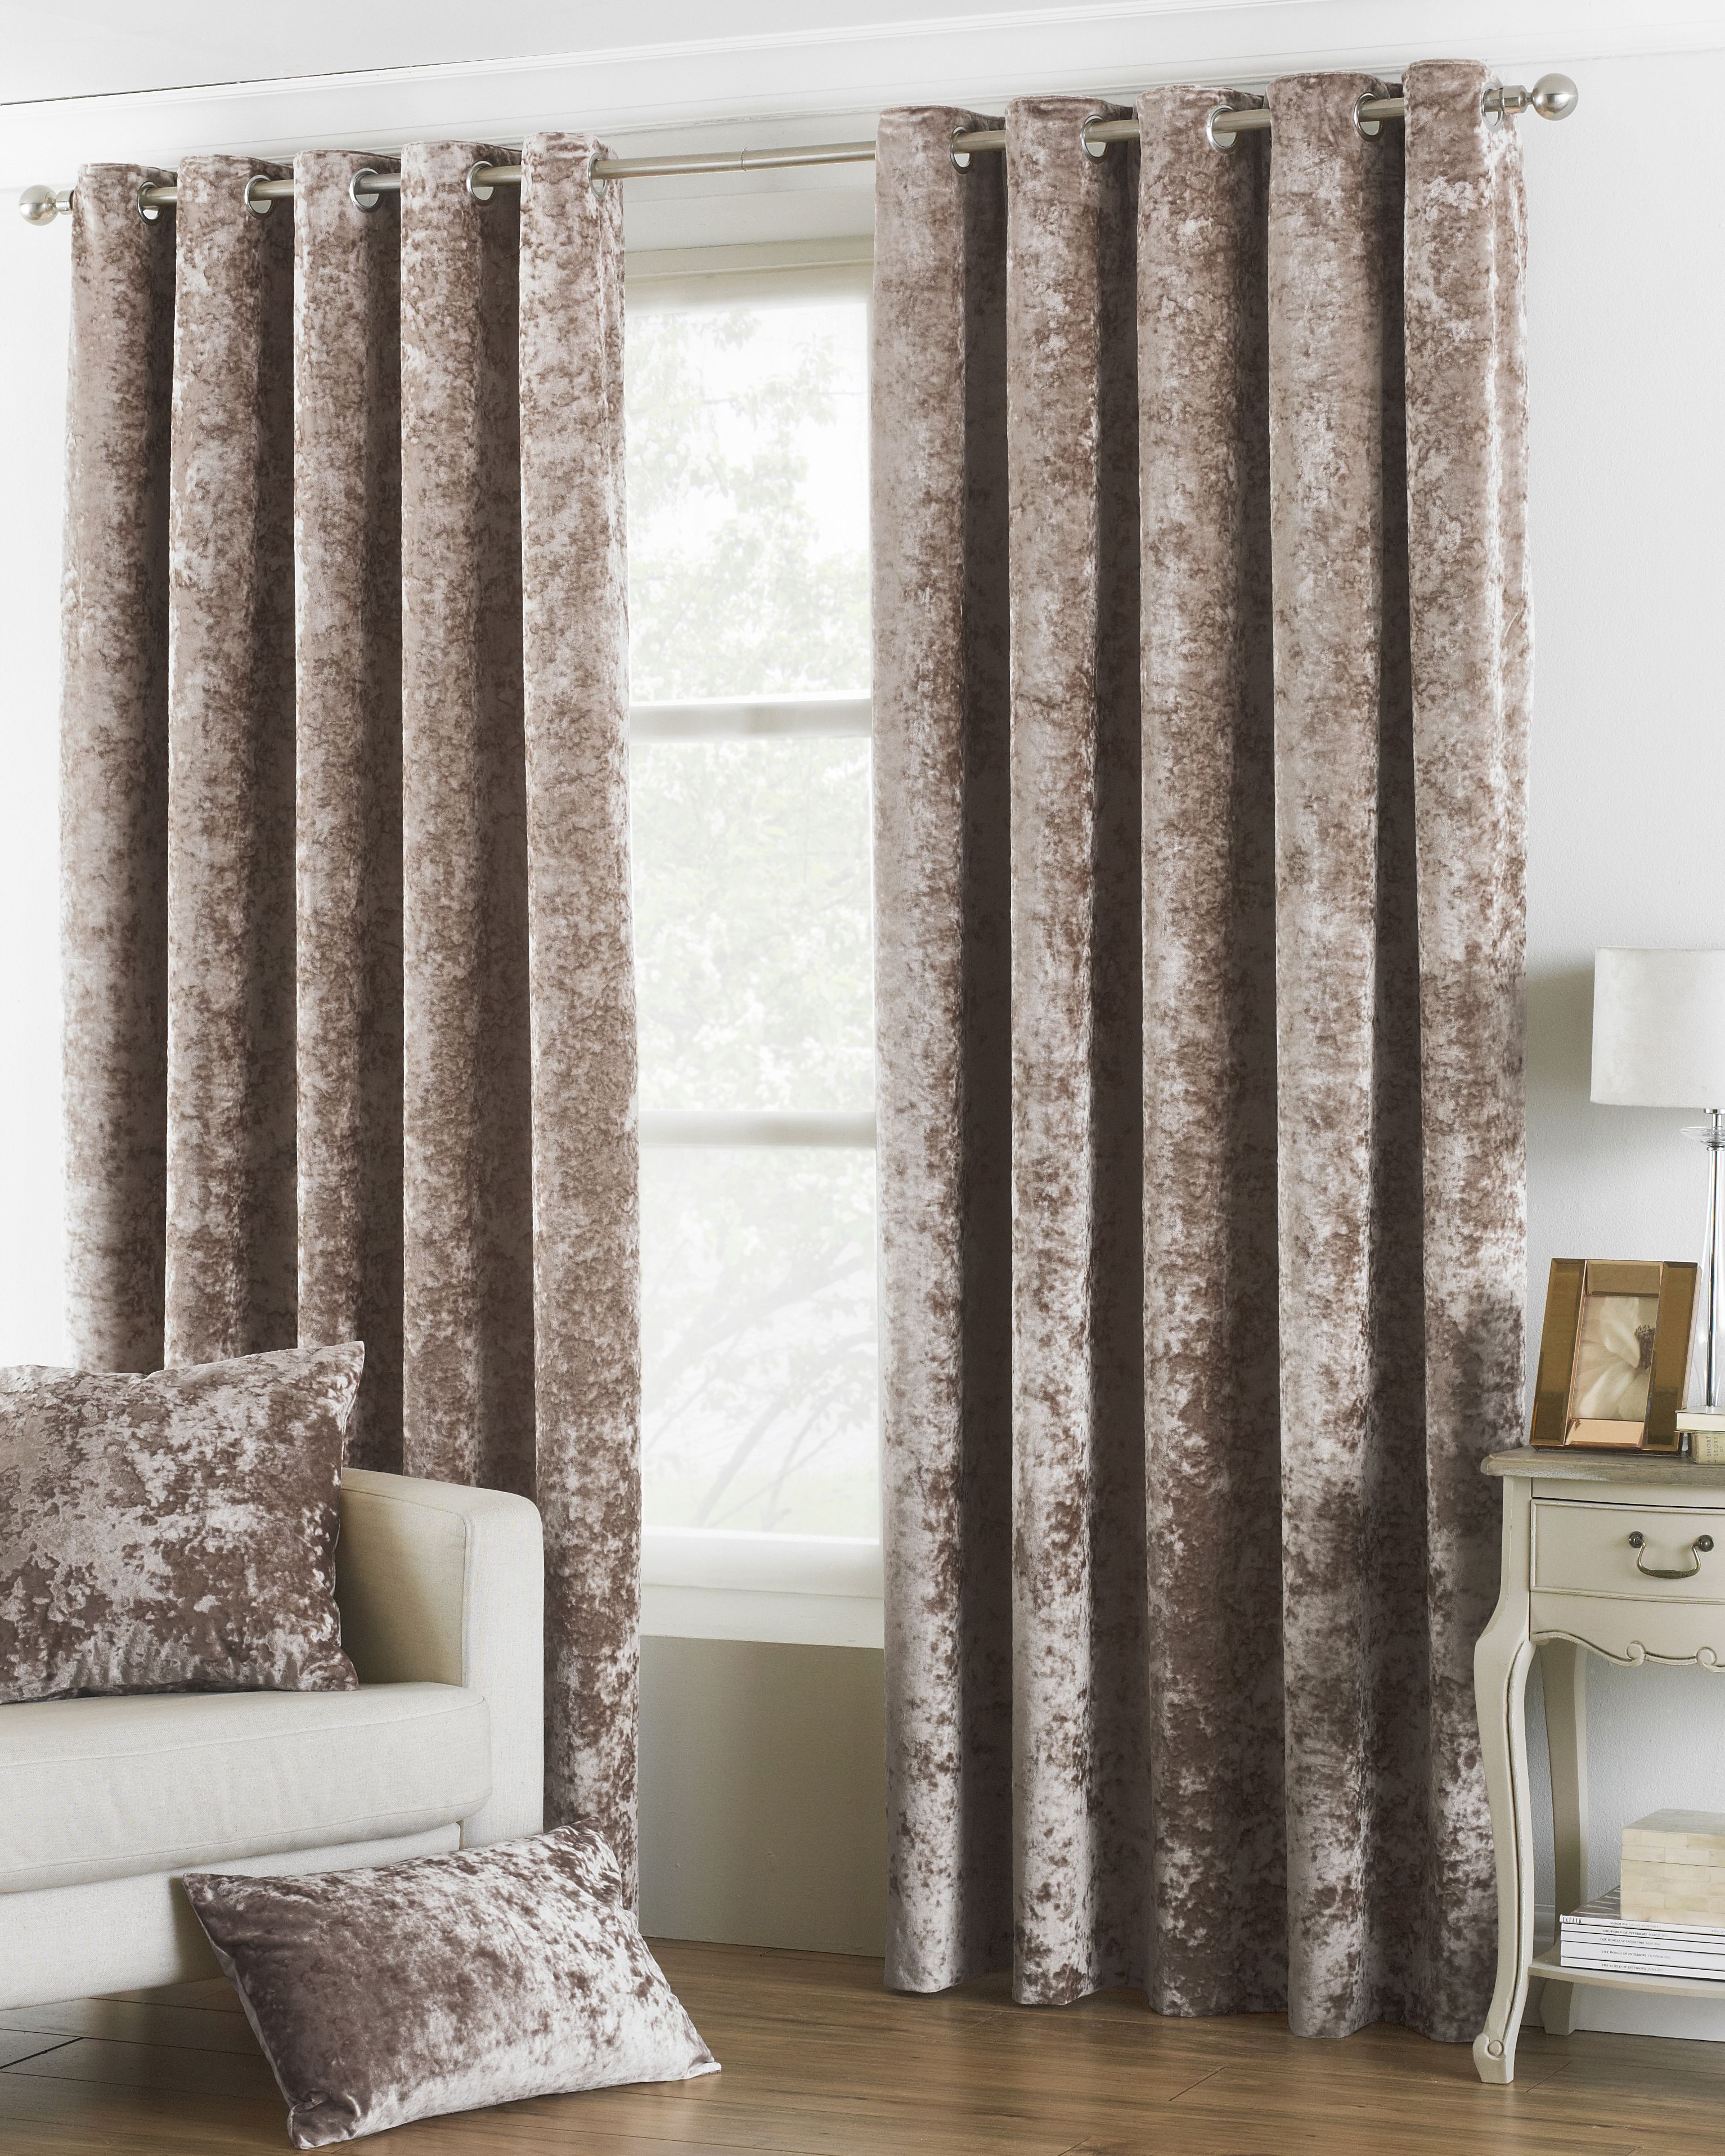 The Verona crushed velvet ringtop eyelet curtains provide you with a opulent centrepiece for your home. The velvet-look material and insulating properties will keep you feeling cosy in the colder months while it's room dakrening design will shield you from the low winter sun. Large ringtop detailing make it easy to install, meaning no fussy hooks . The Verona eyelet curtains are available in a range of sizes and colours to suit even the quirkiest of homes. Coordinate with other Verona products to harmonize your bed with your curtains. Velvet has been picked as the statement fabric of choice for home interiors in 2018. Plush and regal the construction of the fabric allows it to catch and reflect light giving it a shimmering appearance. Velvet products have intensely rich colours and suit funkier, nontraditional spaces. Velvet is thick giving it room darkening properties along with an insulation barrier.